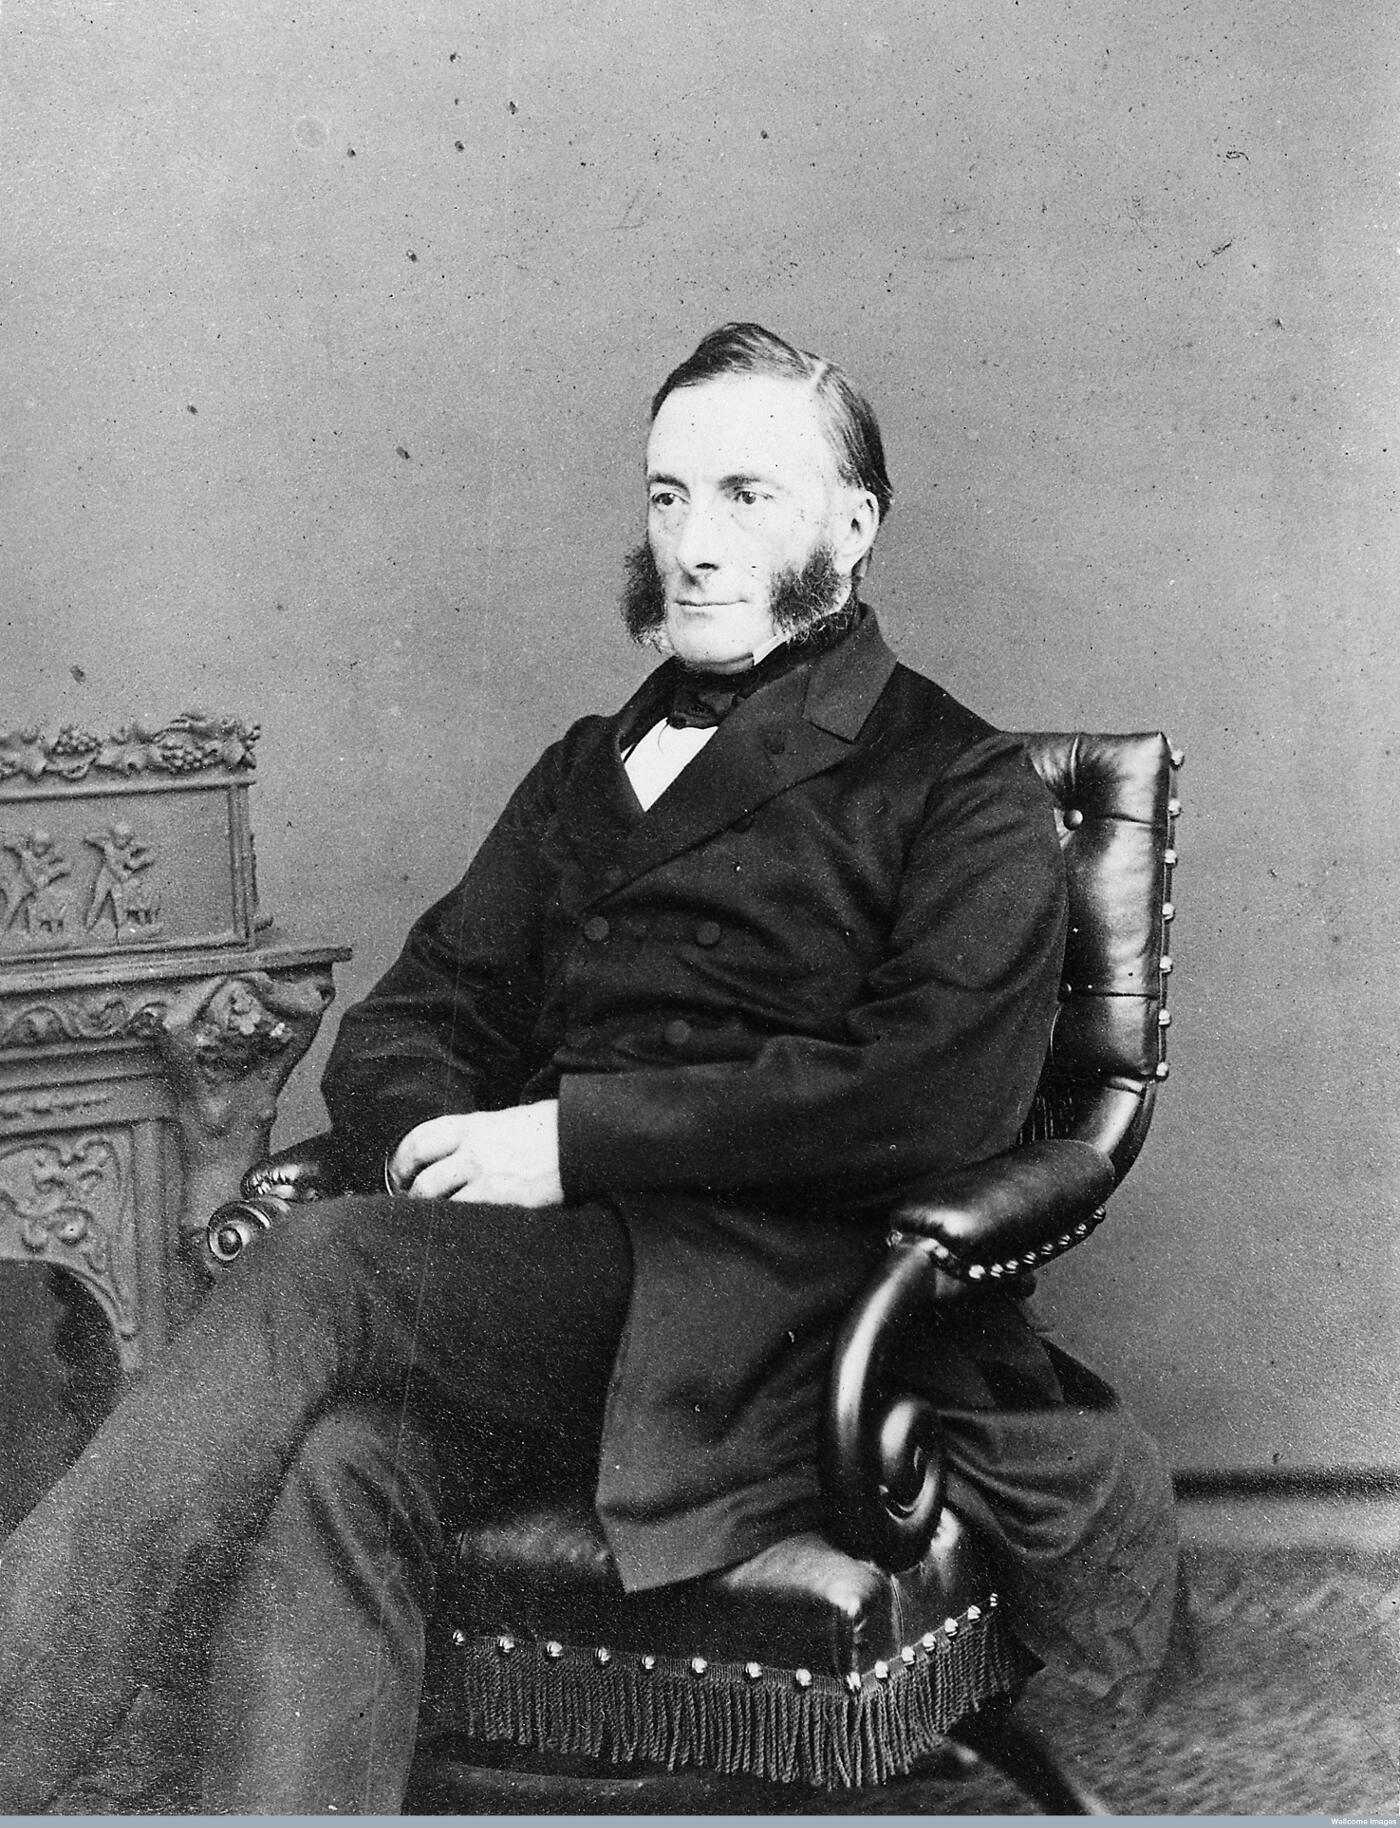 Black and white portrait of a man sitting in a leather chair